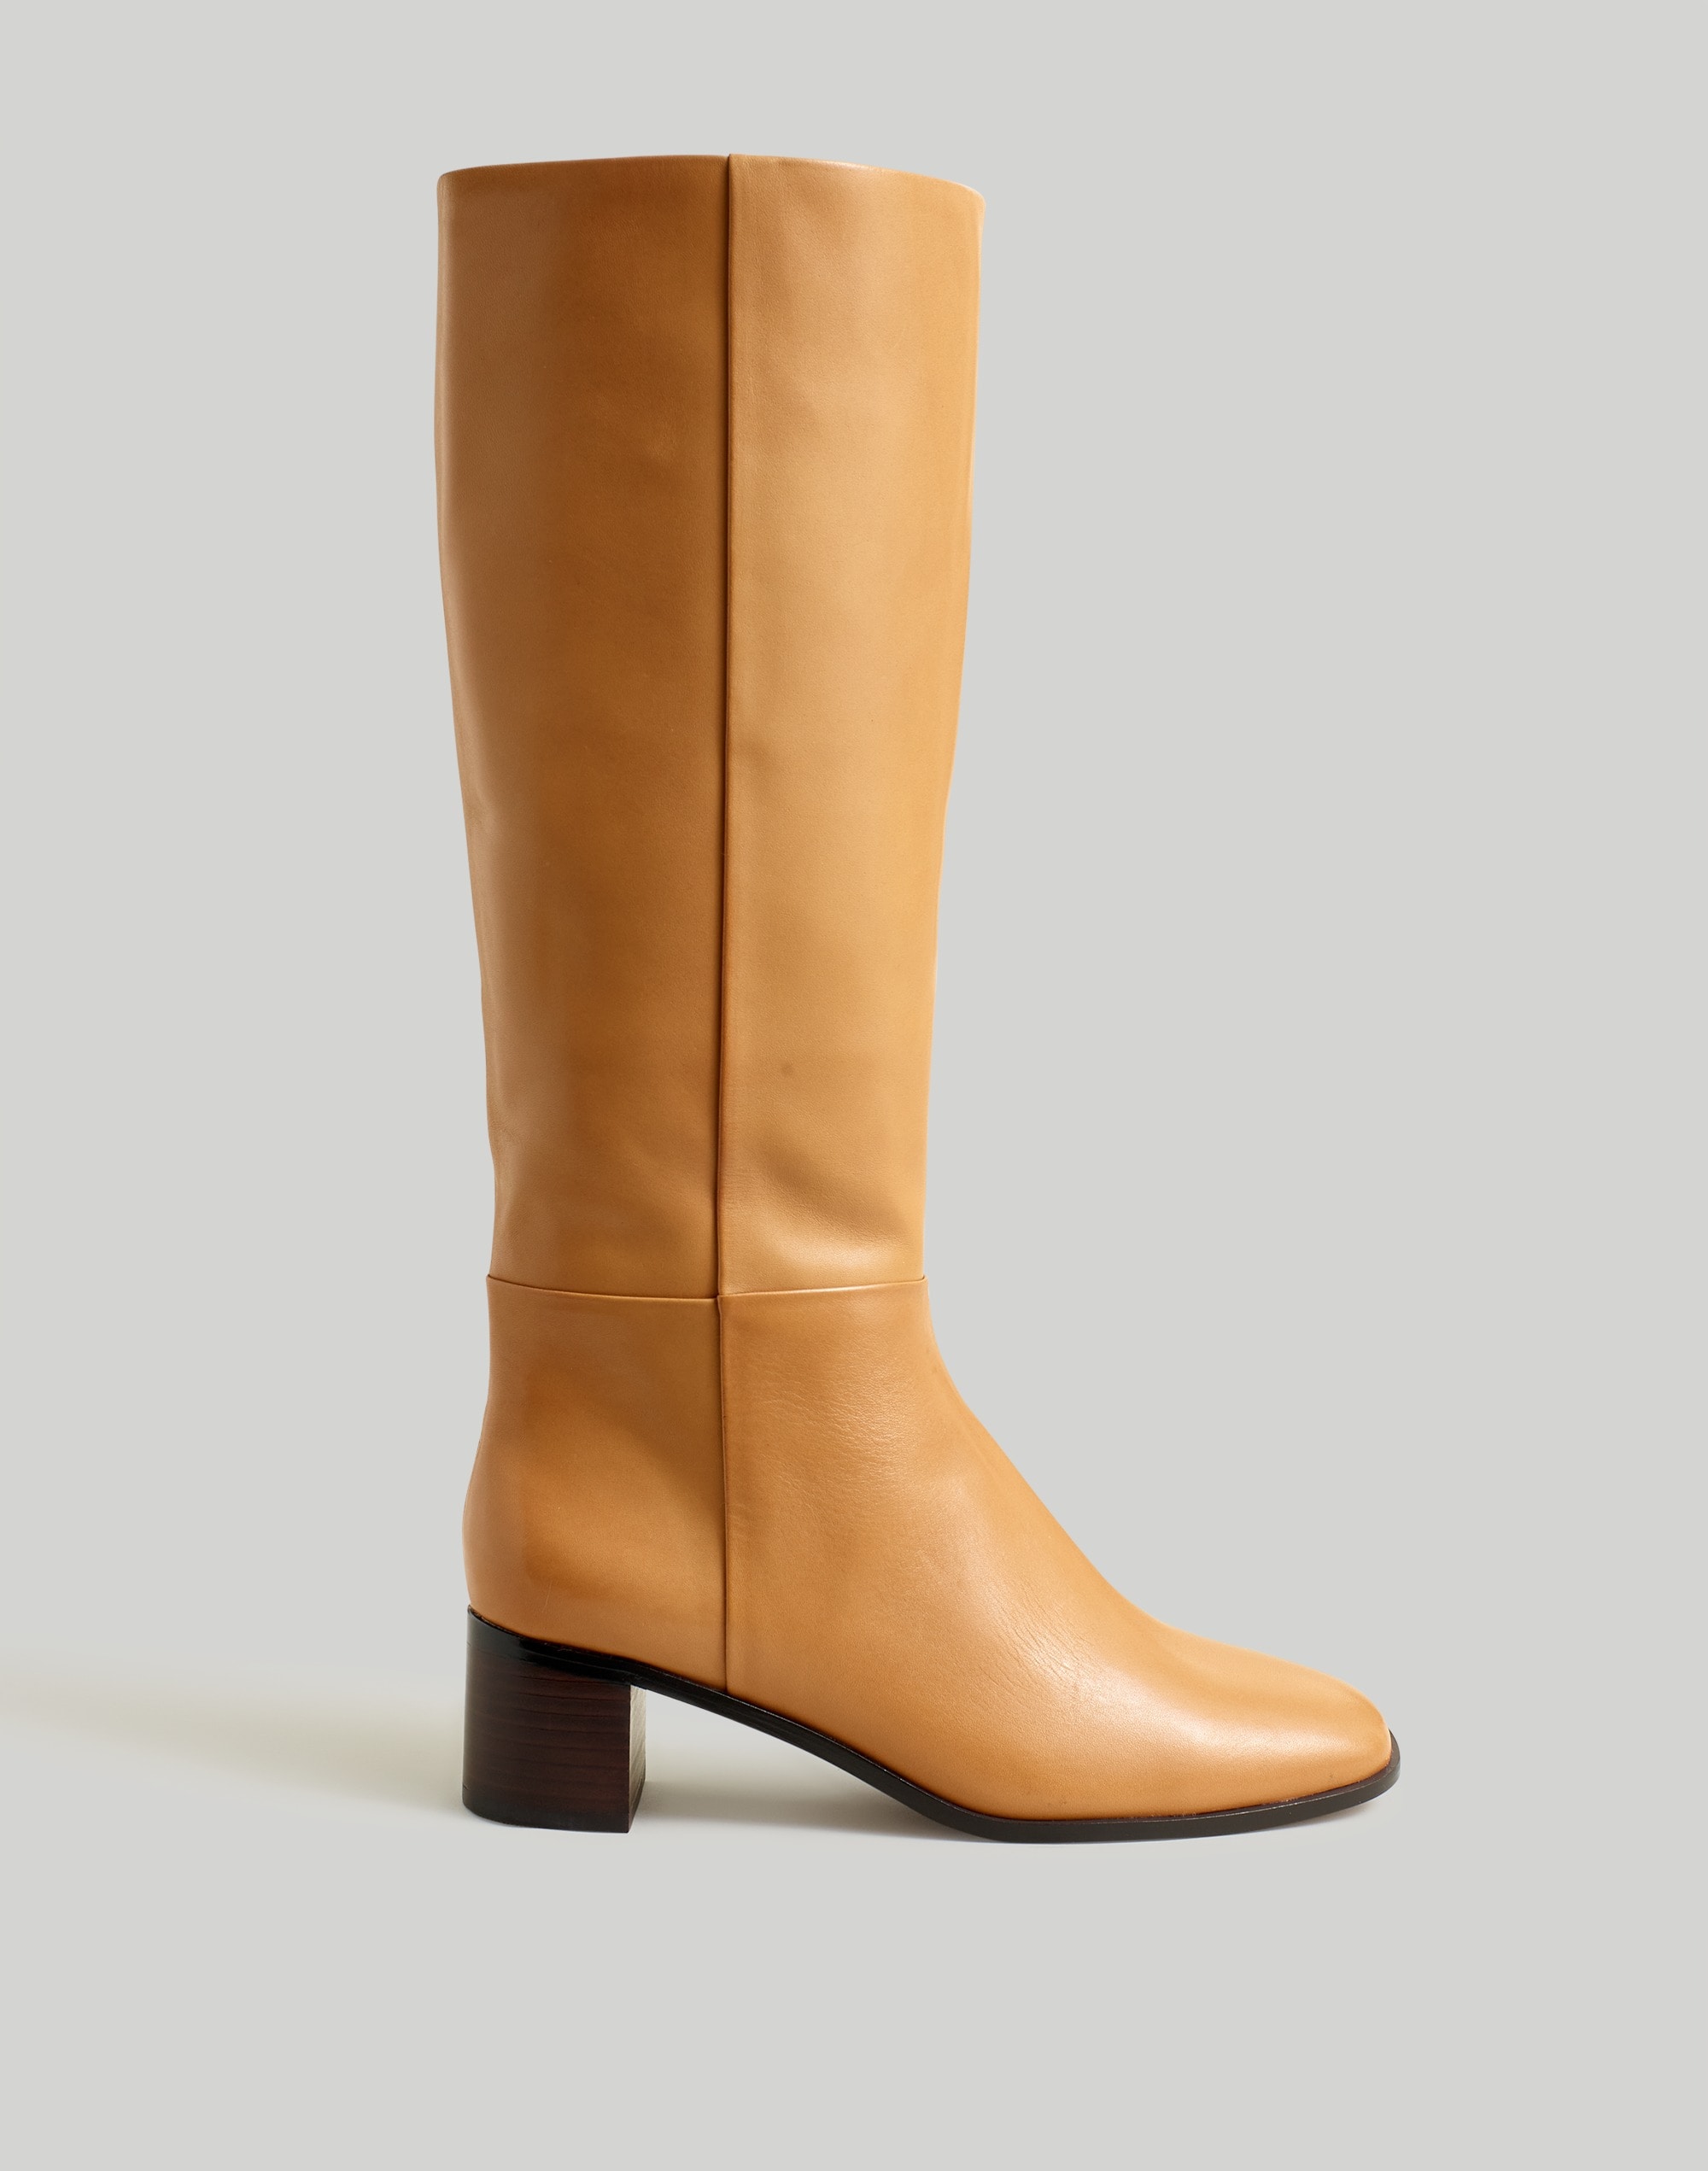 The Monterey Tall Boot